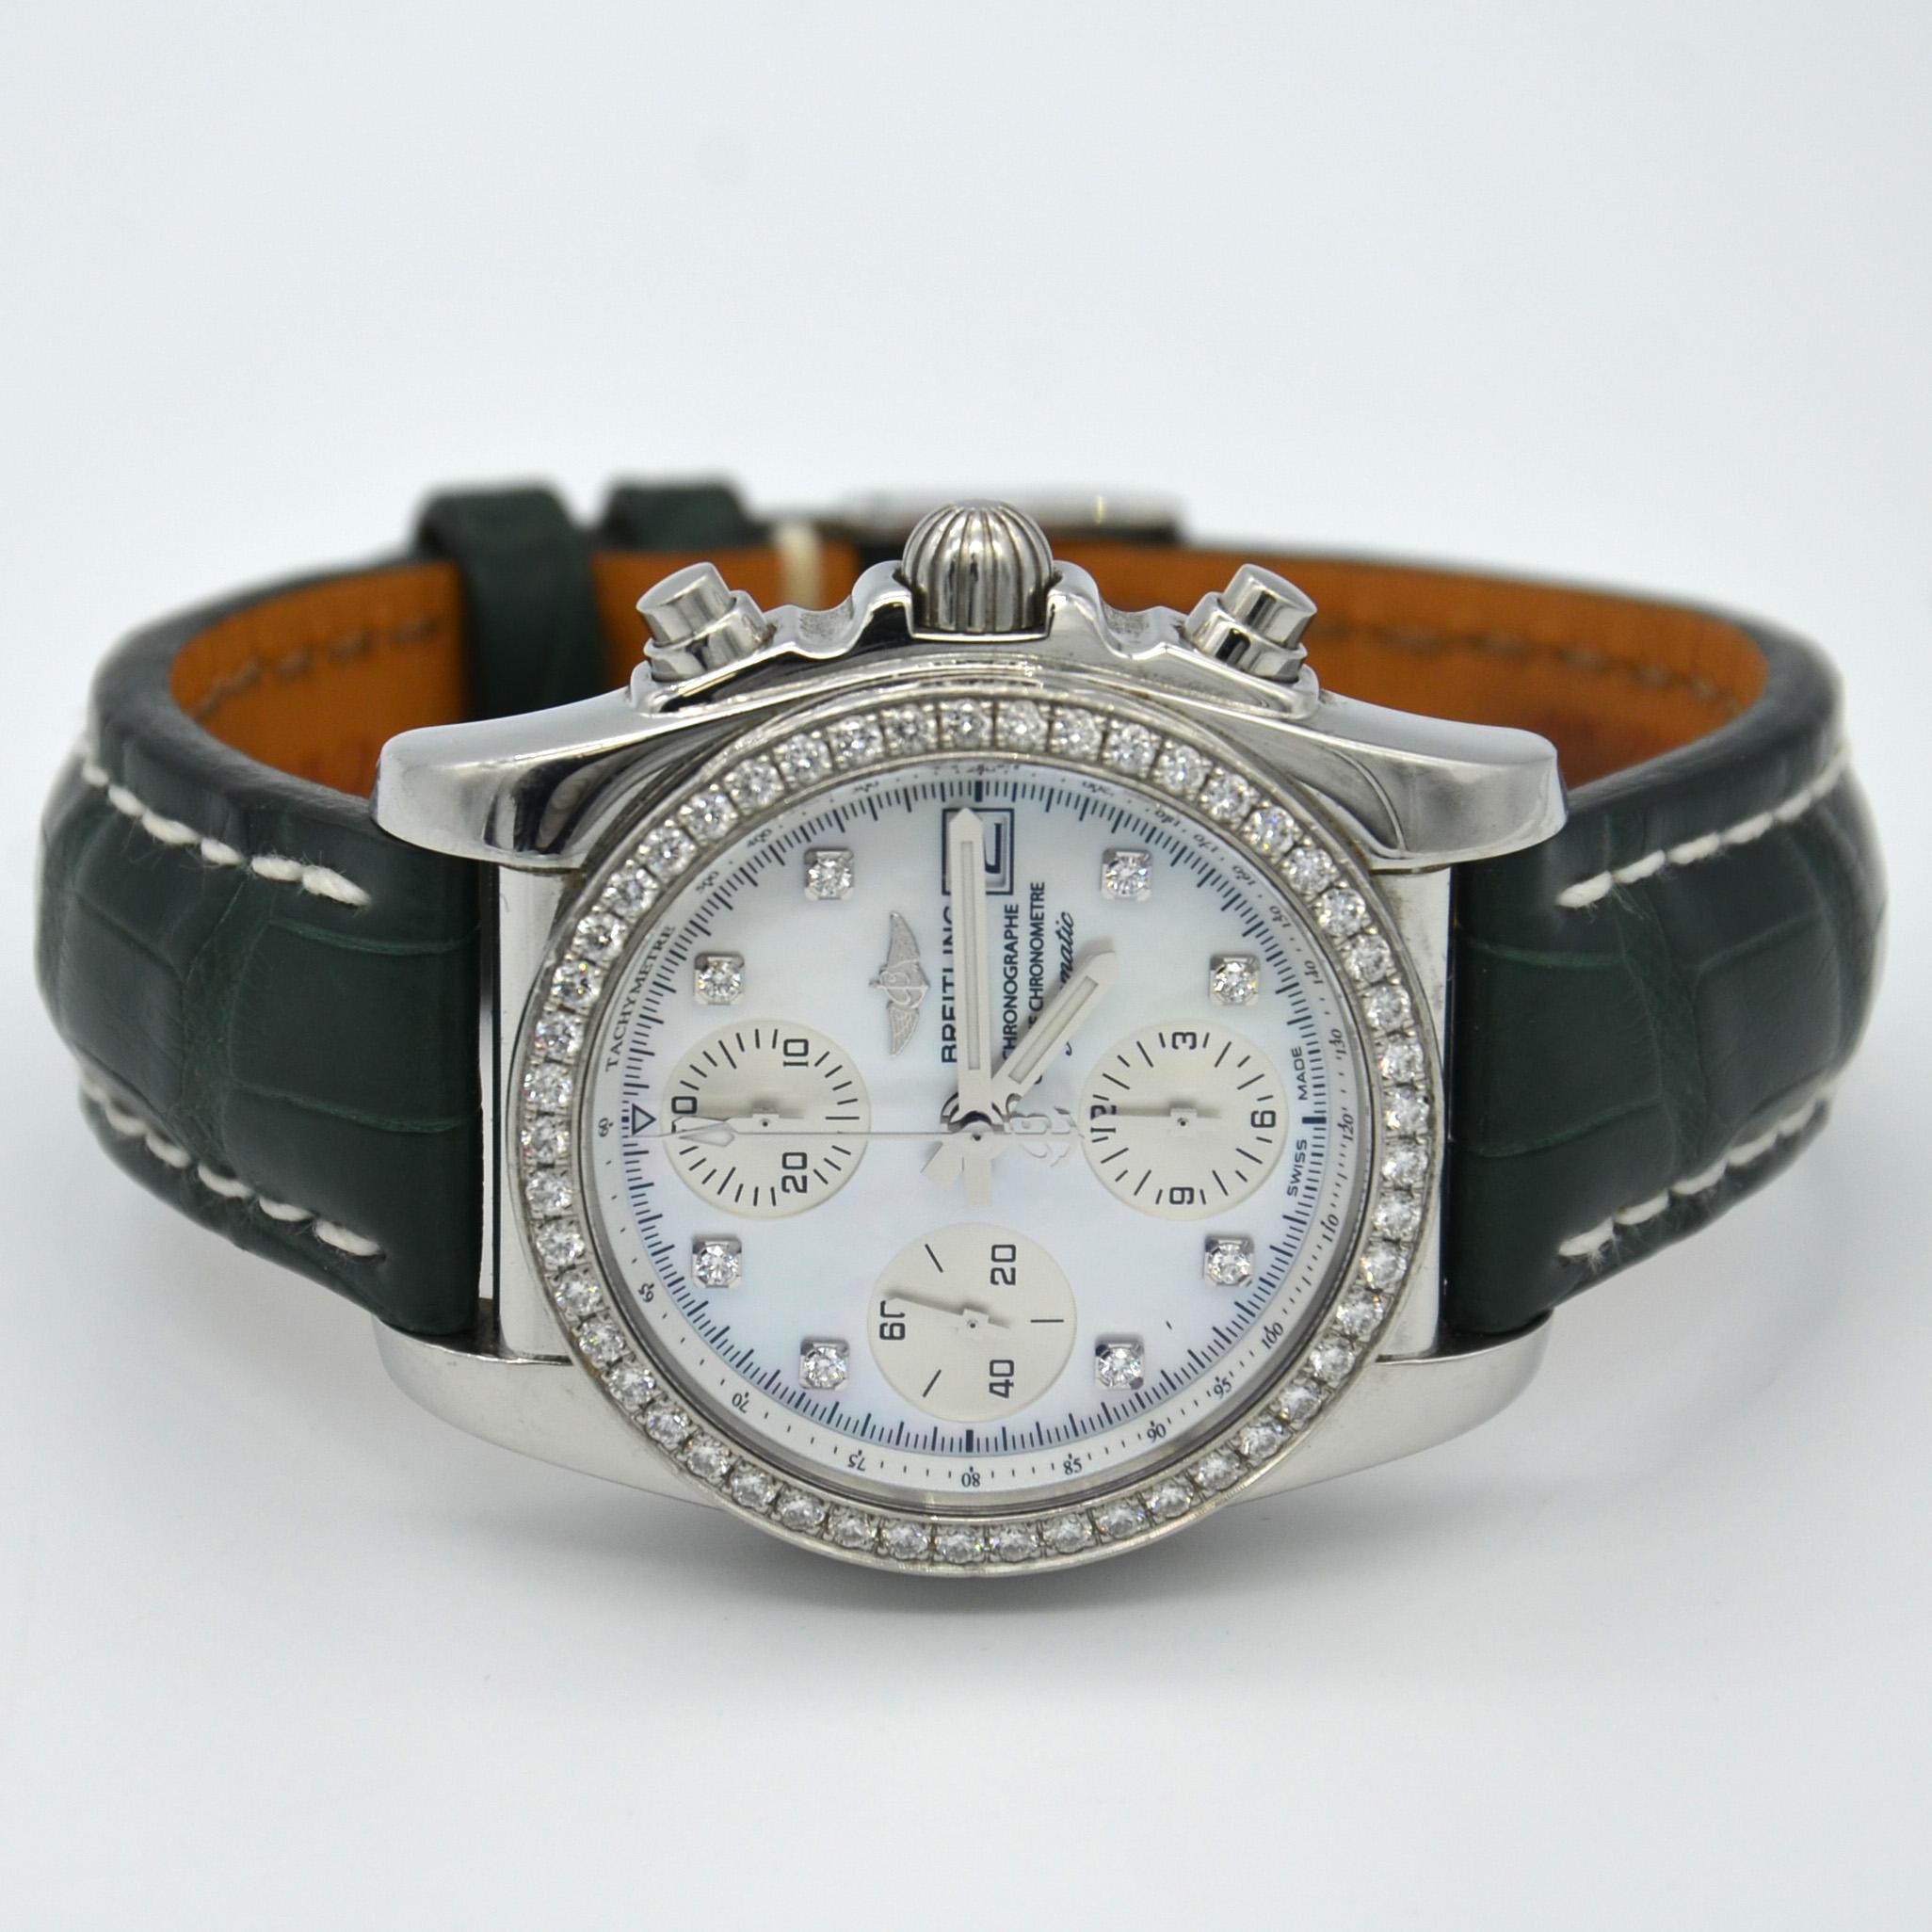 Breitling Chronomat, Reference Number: A13310; 38mm Stainless steel case, Factory mother of pearls dial featuring Automatic movement with Chronograph and date, stainless steel diamond bezel and  hour markers original factory set fitted to a Genuine